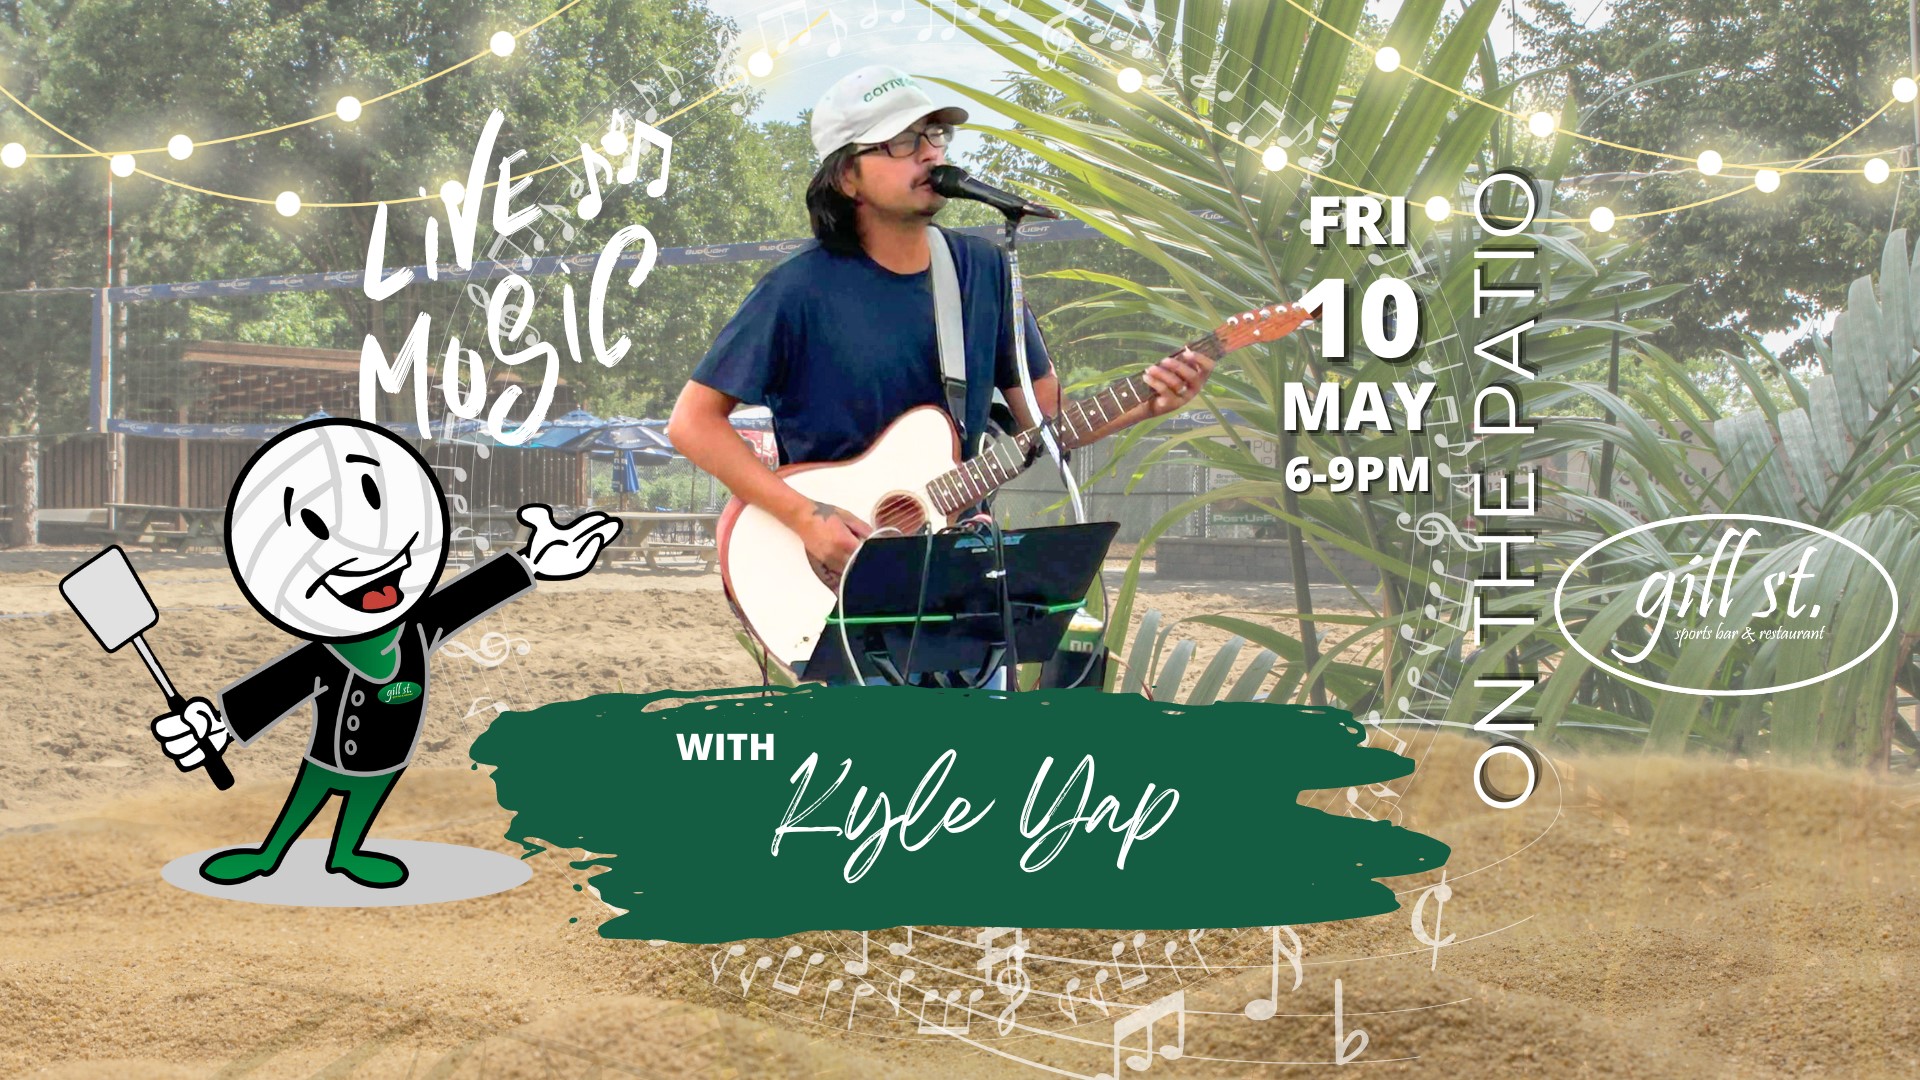 Live Music with Kyle Yap